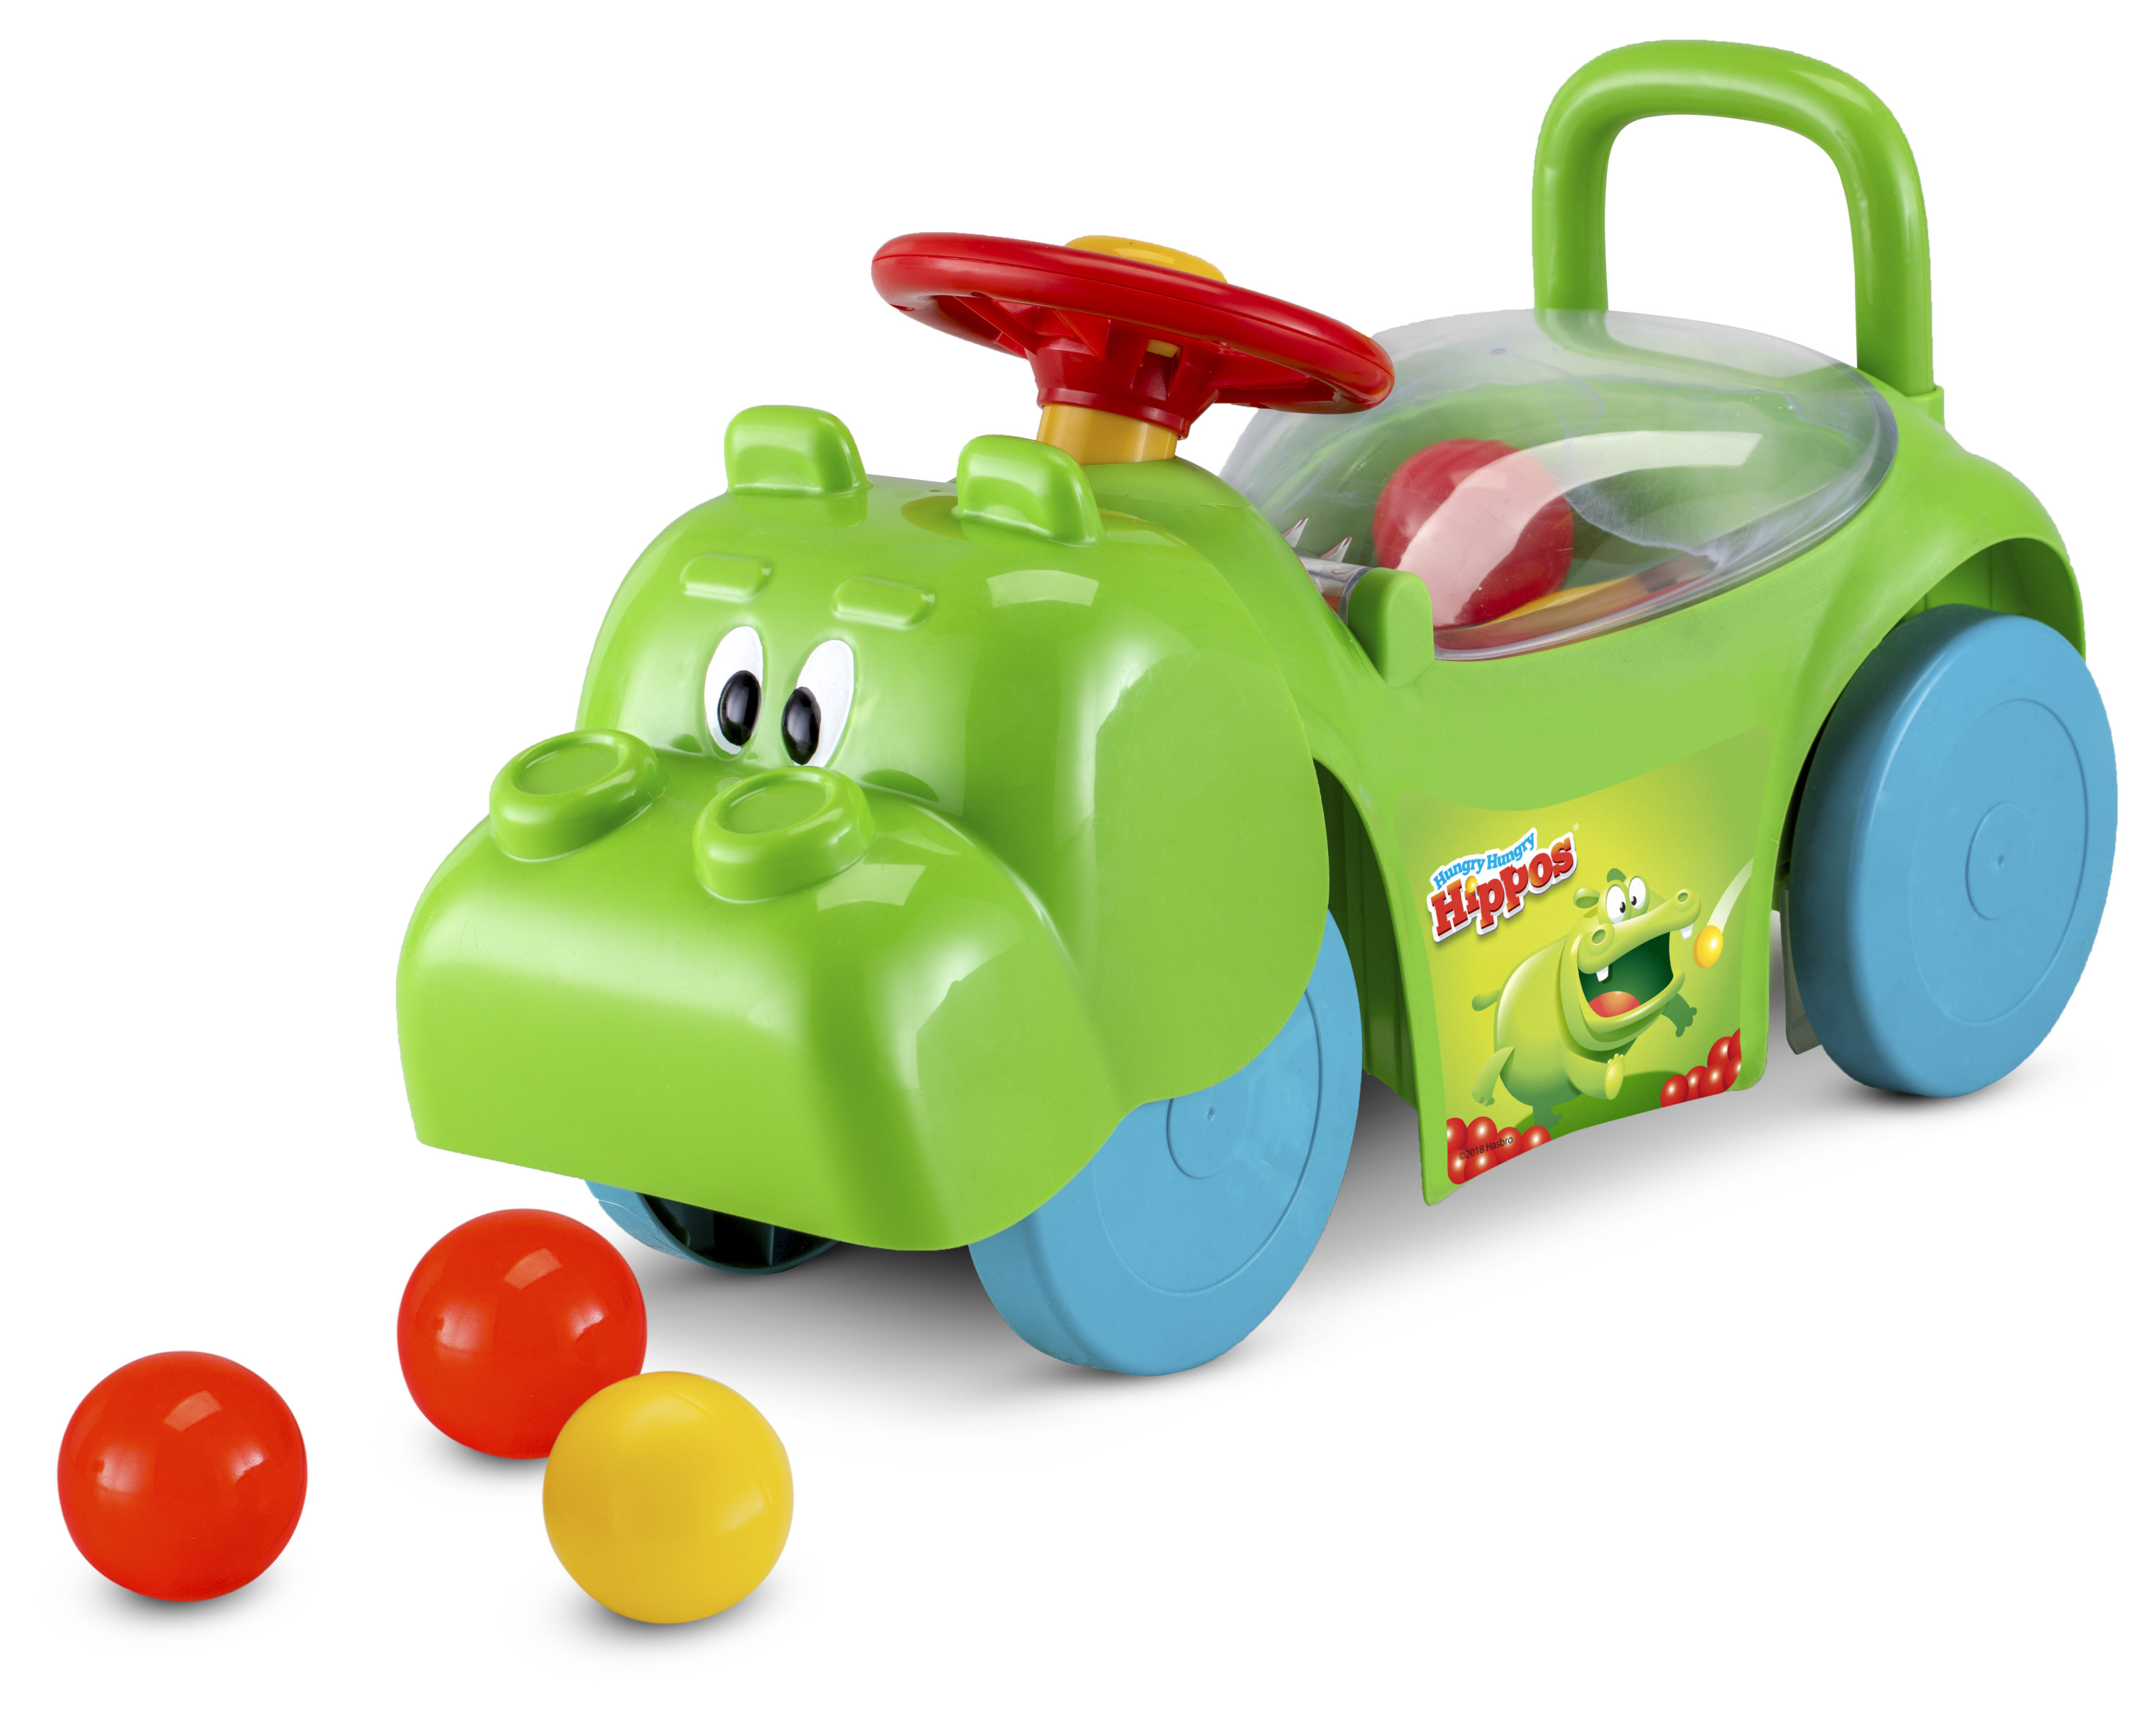 Hasbro Hungry Hungry Hippos 3 in 1 Scoot and Ride On Toy by Kid Trax, Toddler - image 3 of 10